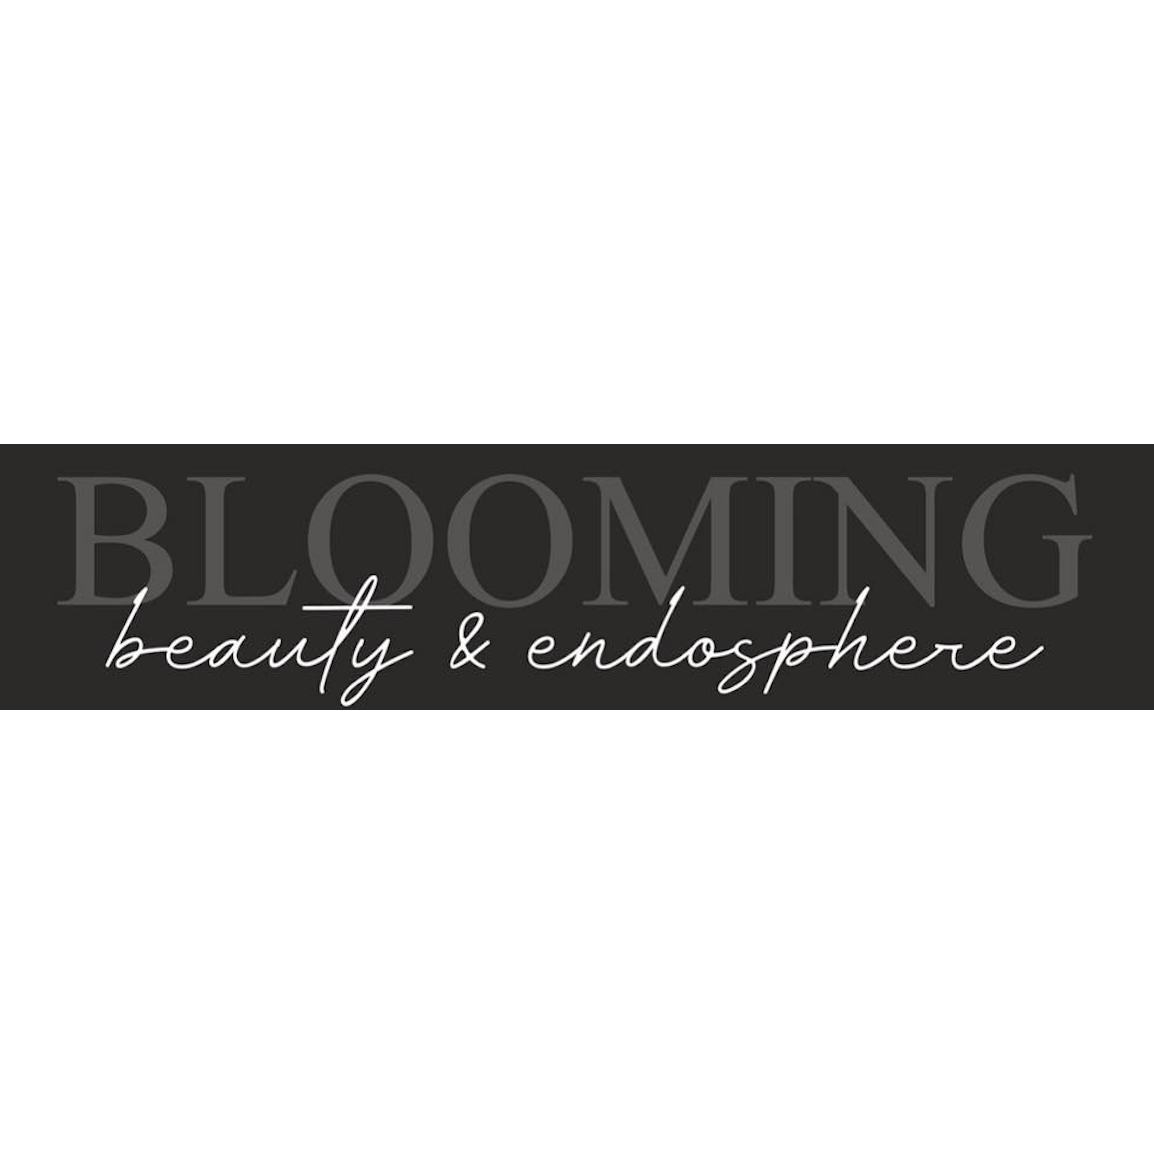 Blooming Beauty Endosphere - Stamford, CT 06905 - (203)832-7569 | ShowMeLocal.com